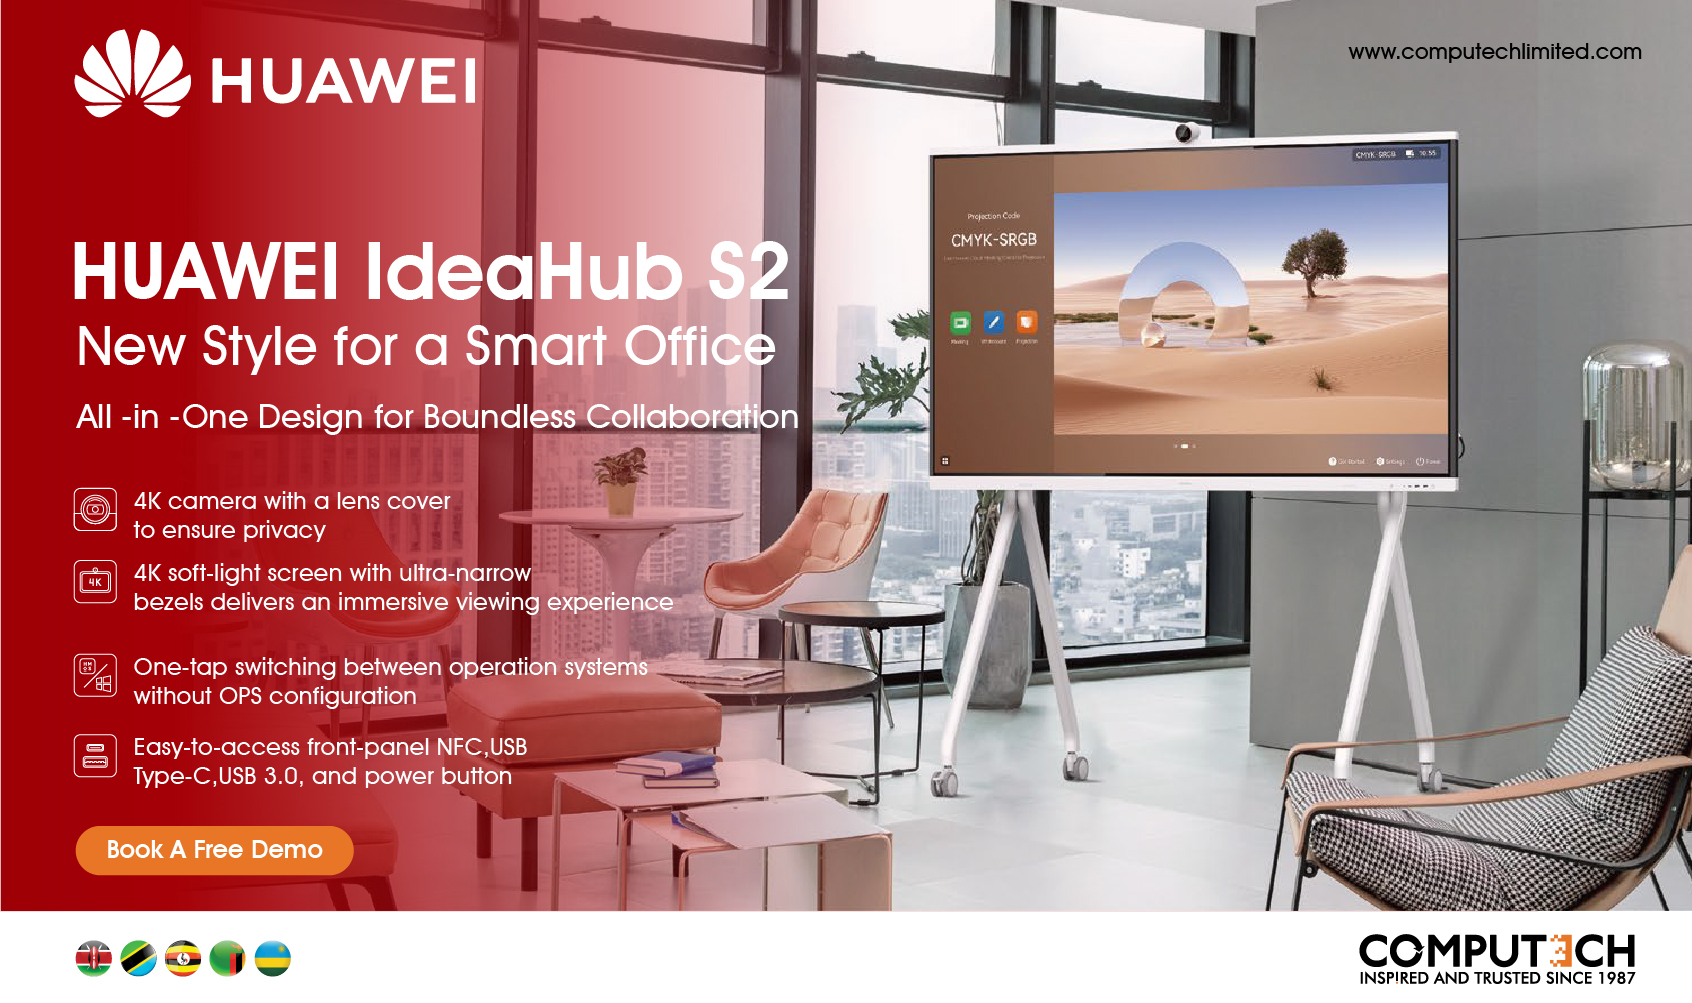 Embracing Simplicity & Innovation with Huawei IdeaHub S2